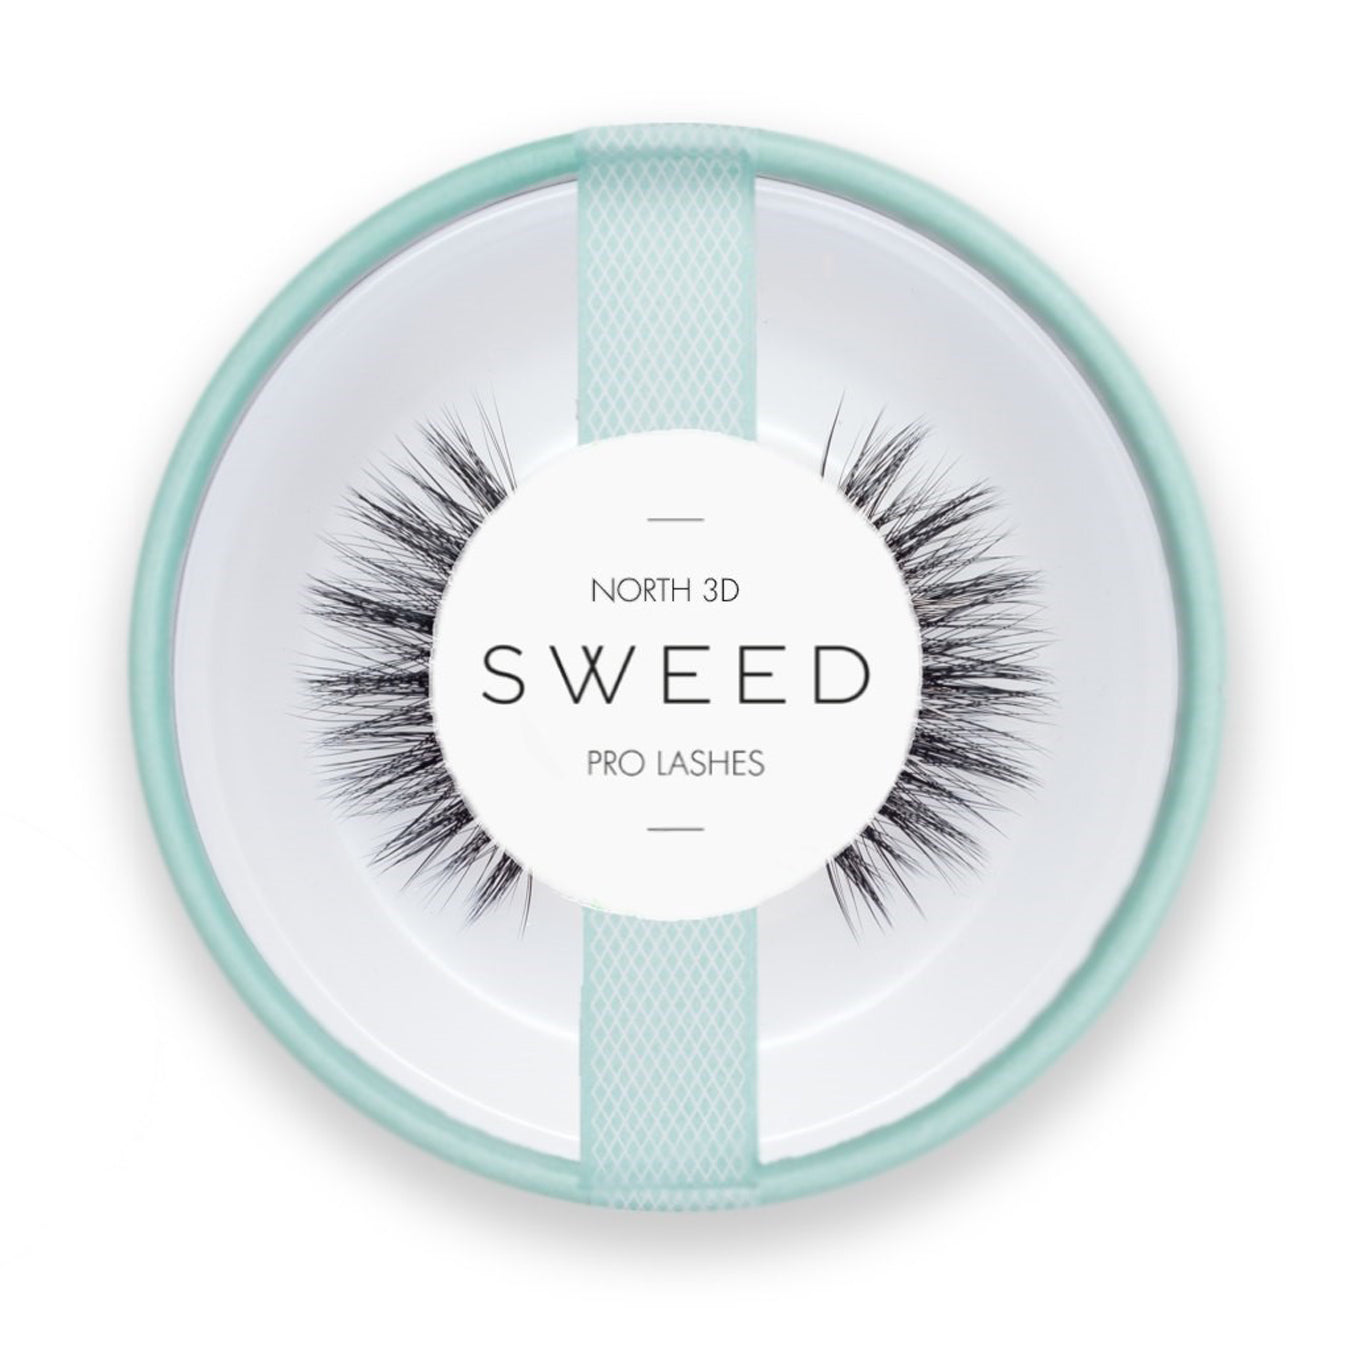 Sweed North 3D Dramatic False Lashes in Black